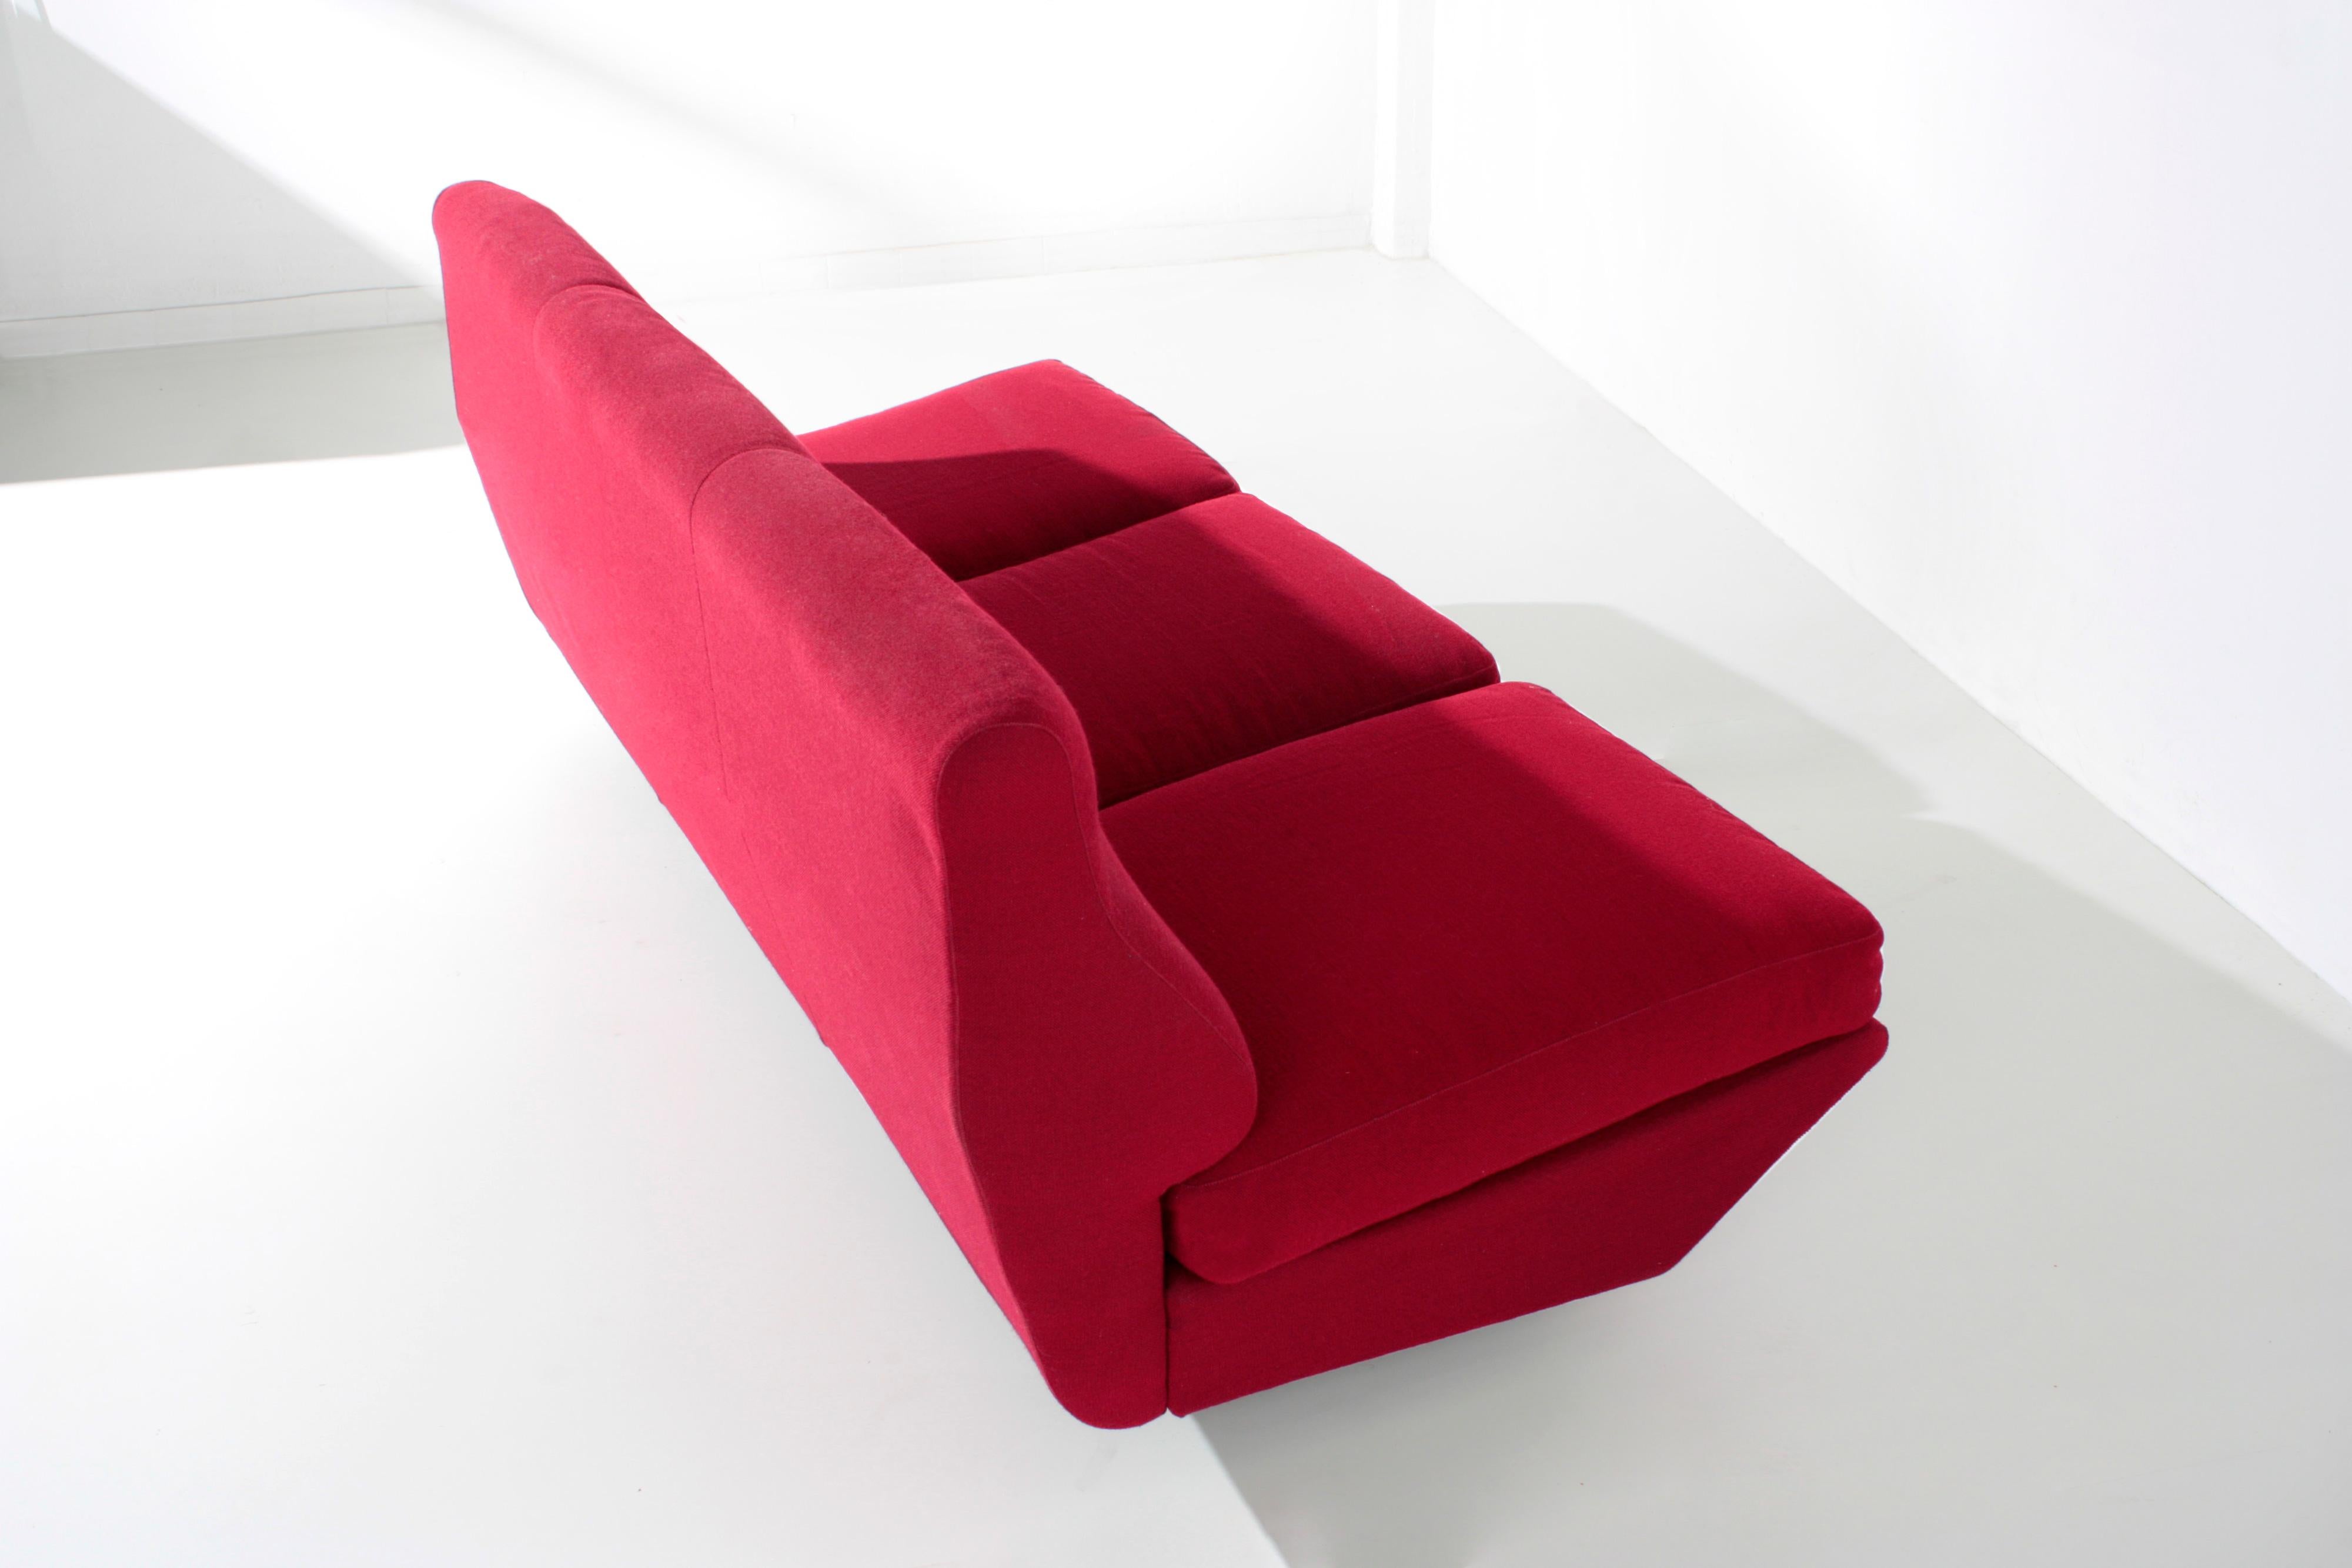 Mid-20th Century Marco Zanuso Sleep-o-Matic Midcentury Sofa Bed in Red Fabric, 1954